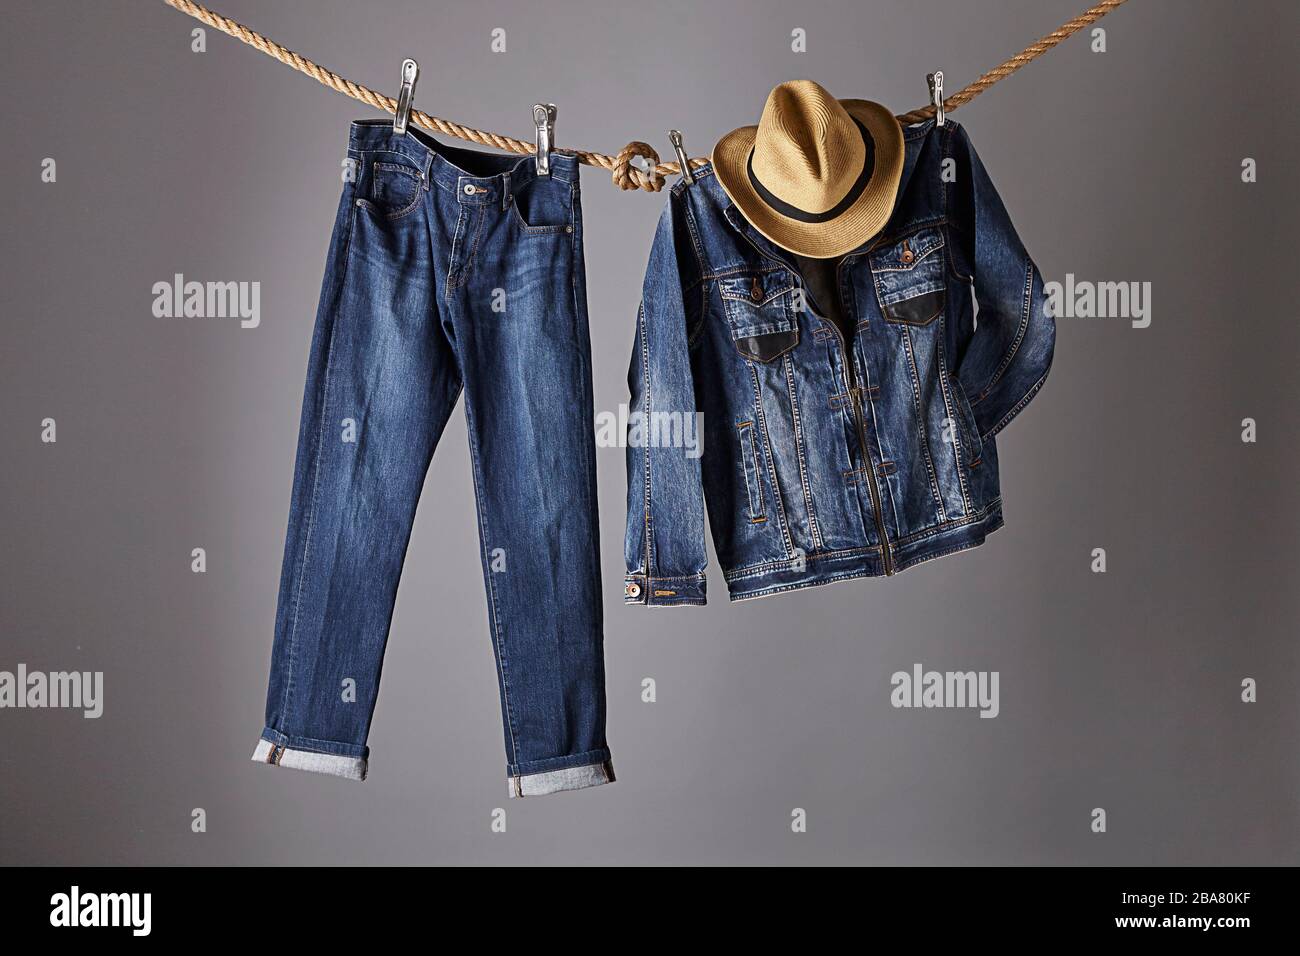 A blue jeans pants hanging from a rope next to a blue jeans jacket and cowboy hat Stock Photo